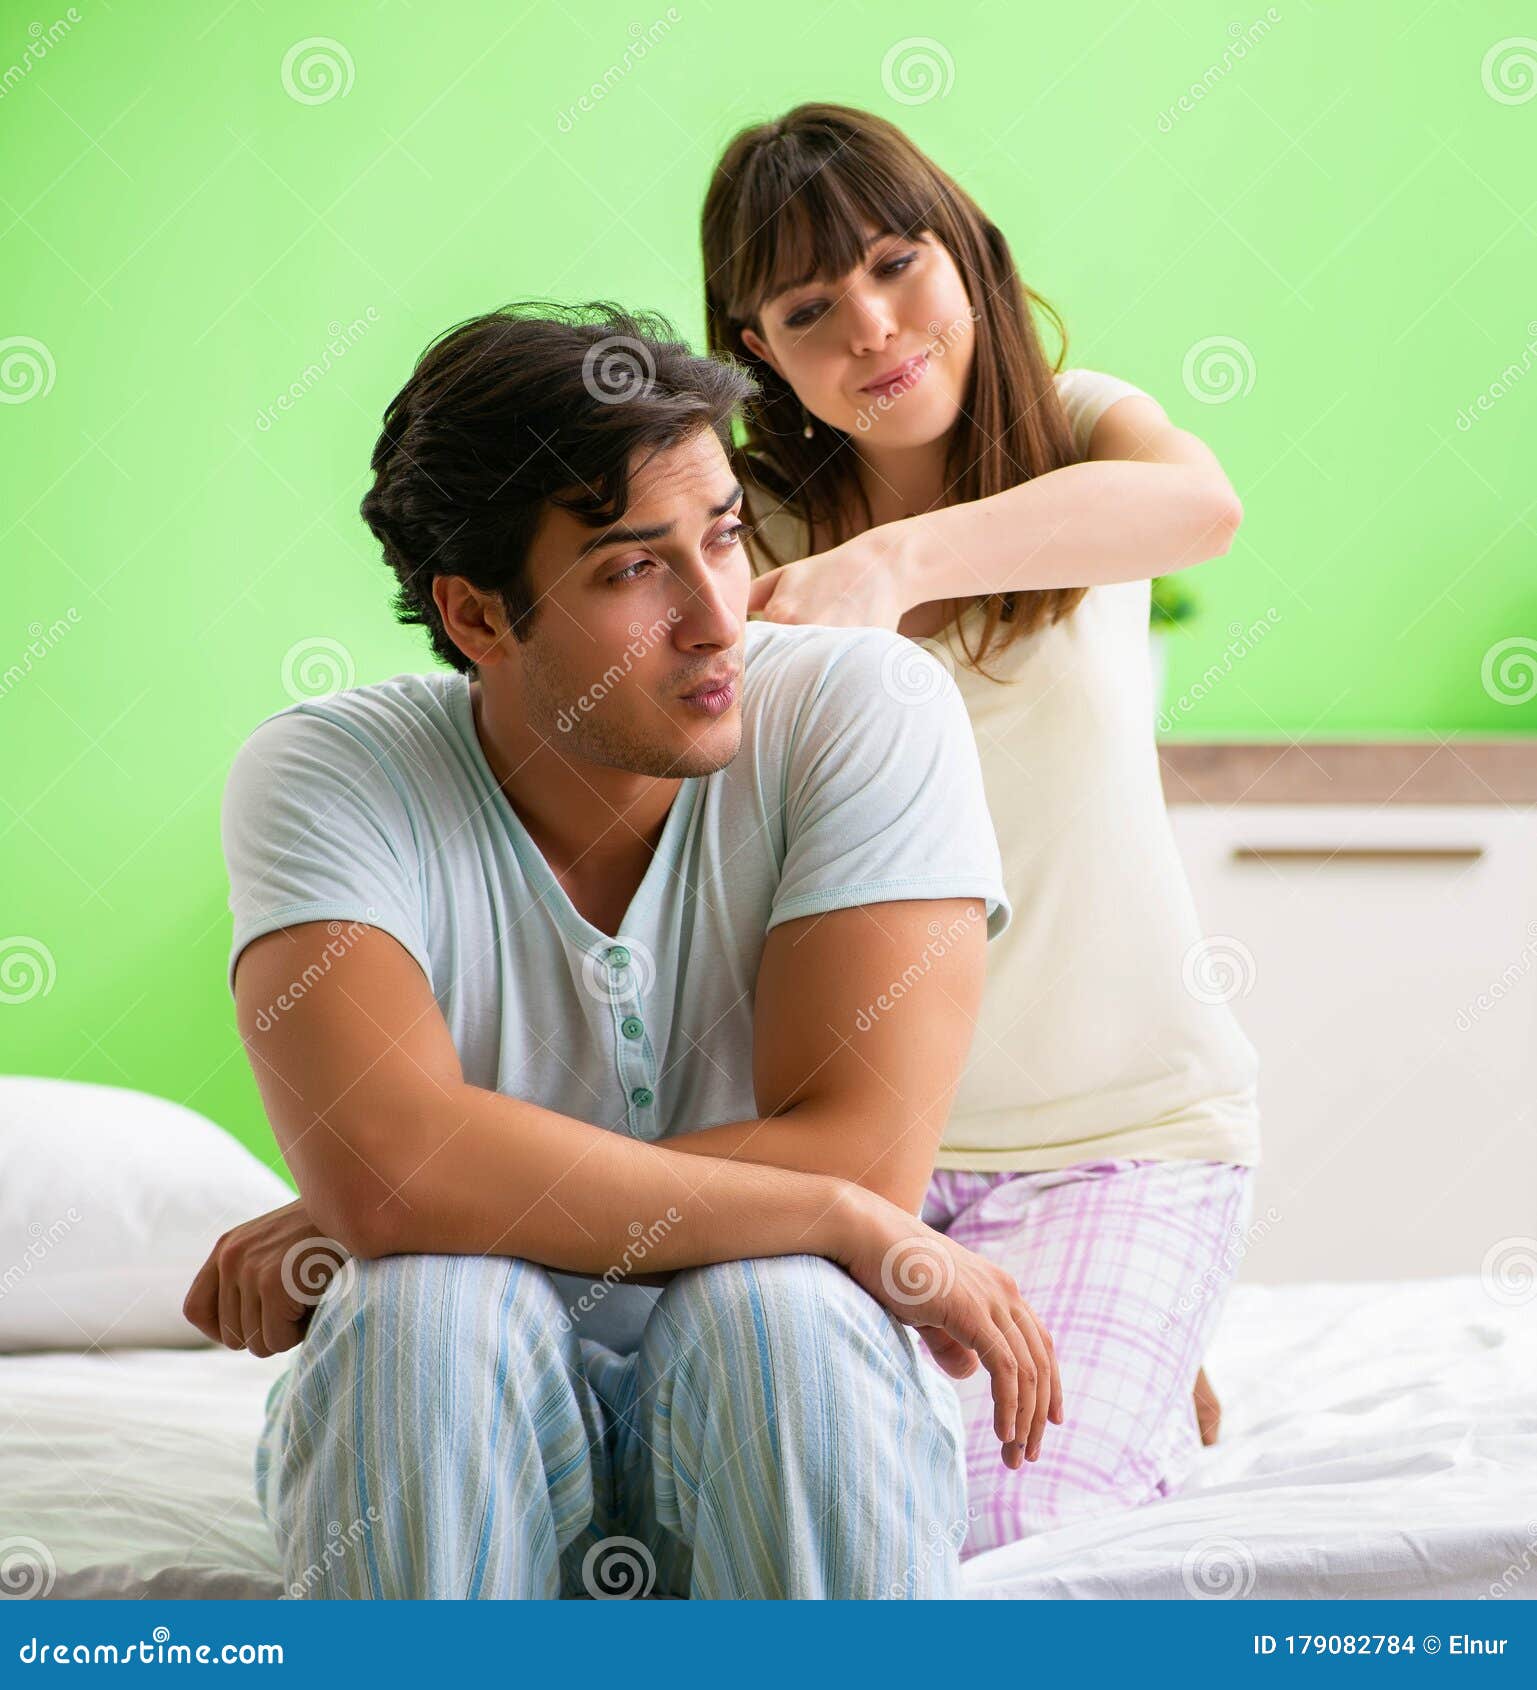 Woman Doing Massage To Her Husband in Bedroom Stock Photo picture pic